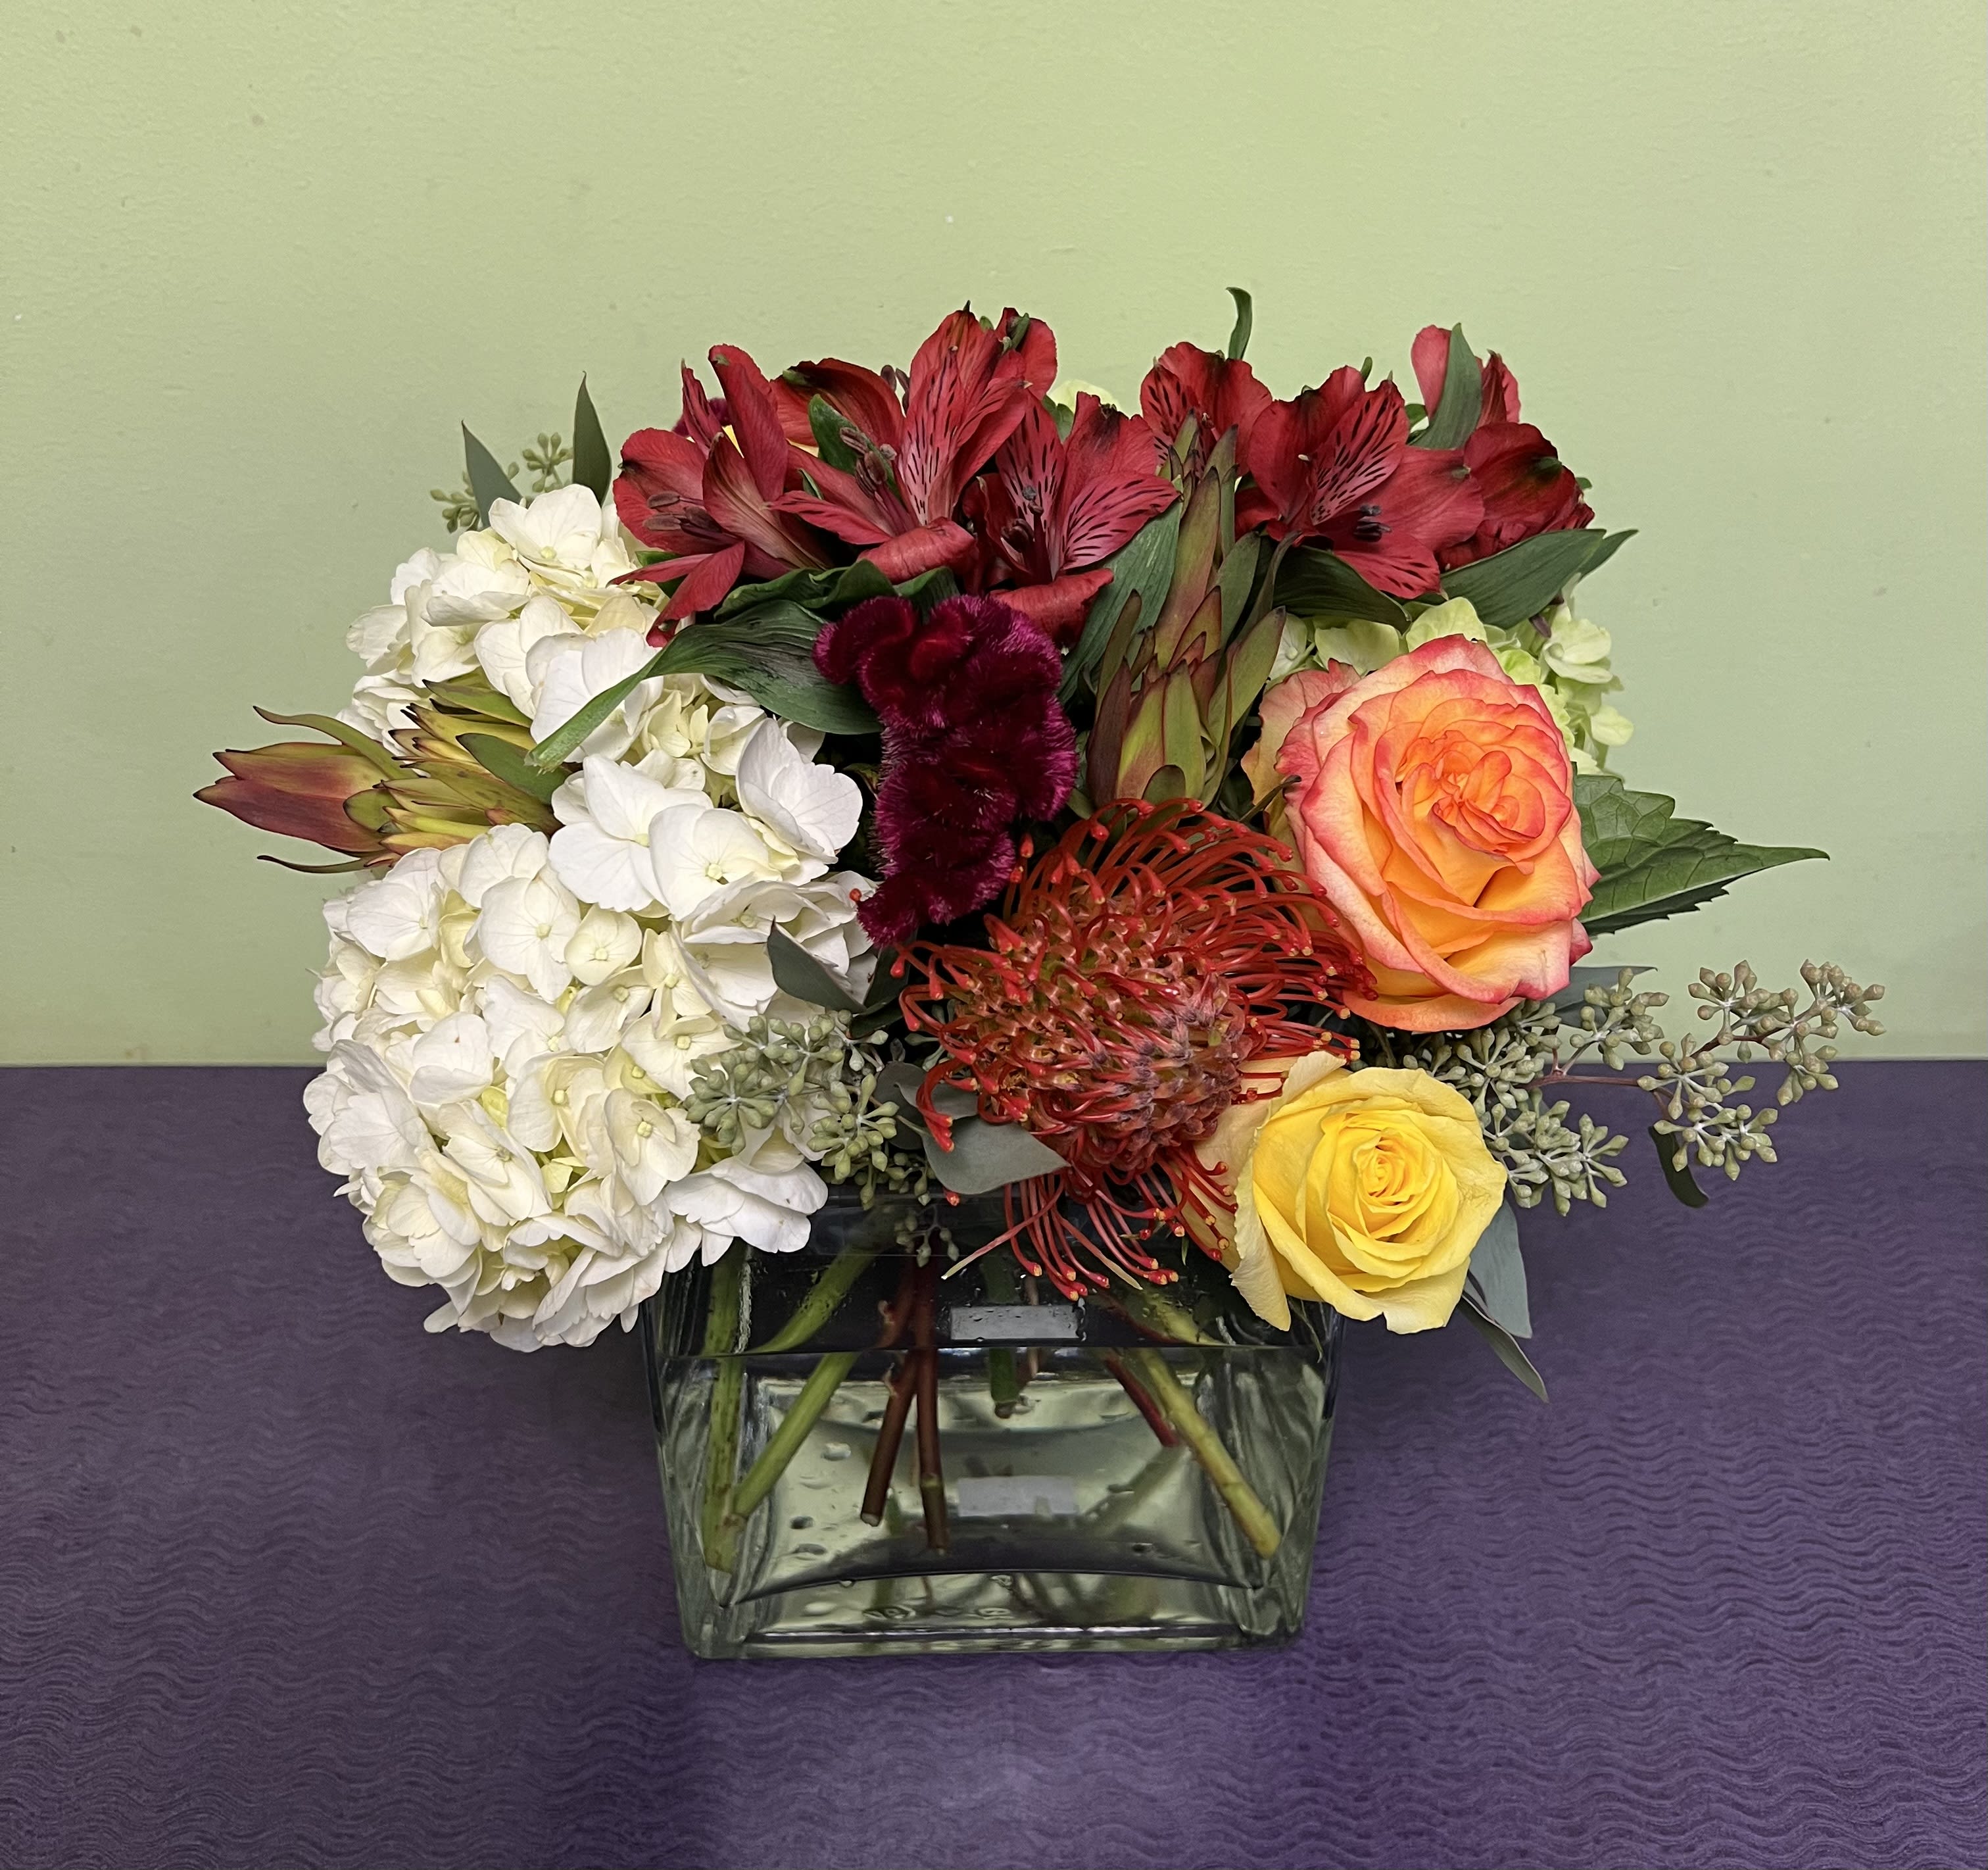 Blazing Blooms - This arrangement is simply on fire with these blazing blooms. What a way to add a bit of brightness to someone's day? This includes Roses, Hydrangeas, Coxcomb, Protea, Alstromeria, Leucadendron, and Eucalyptus.